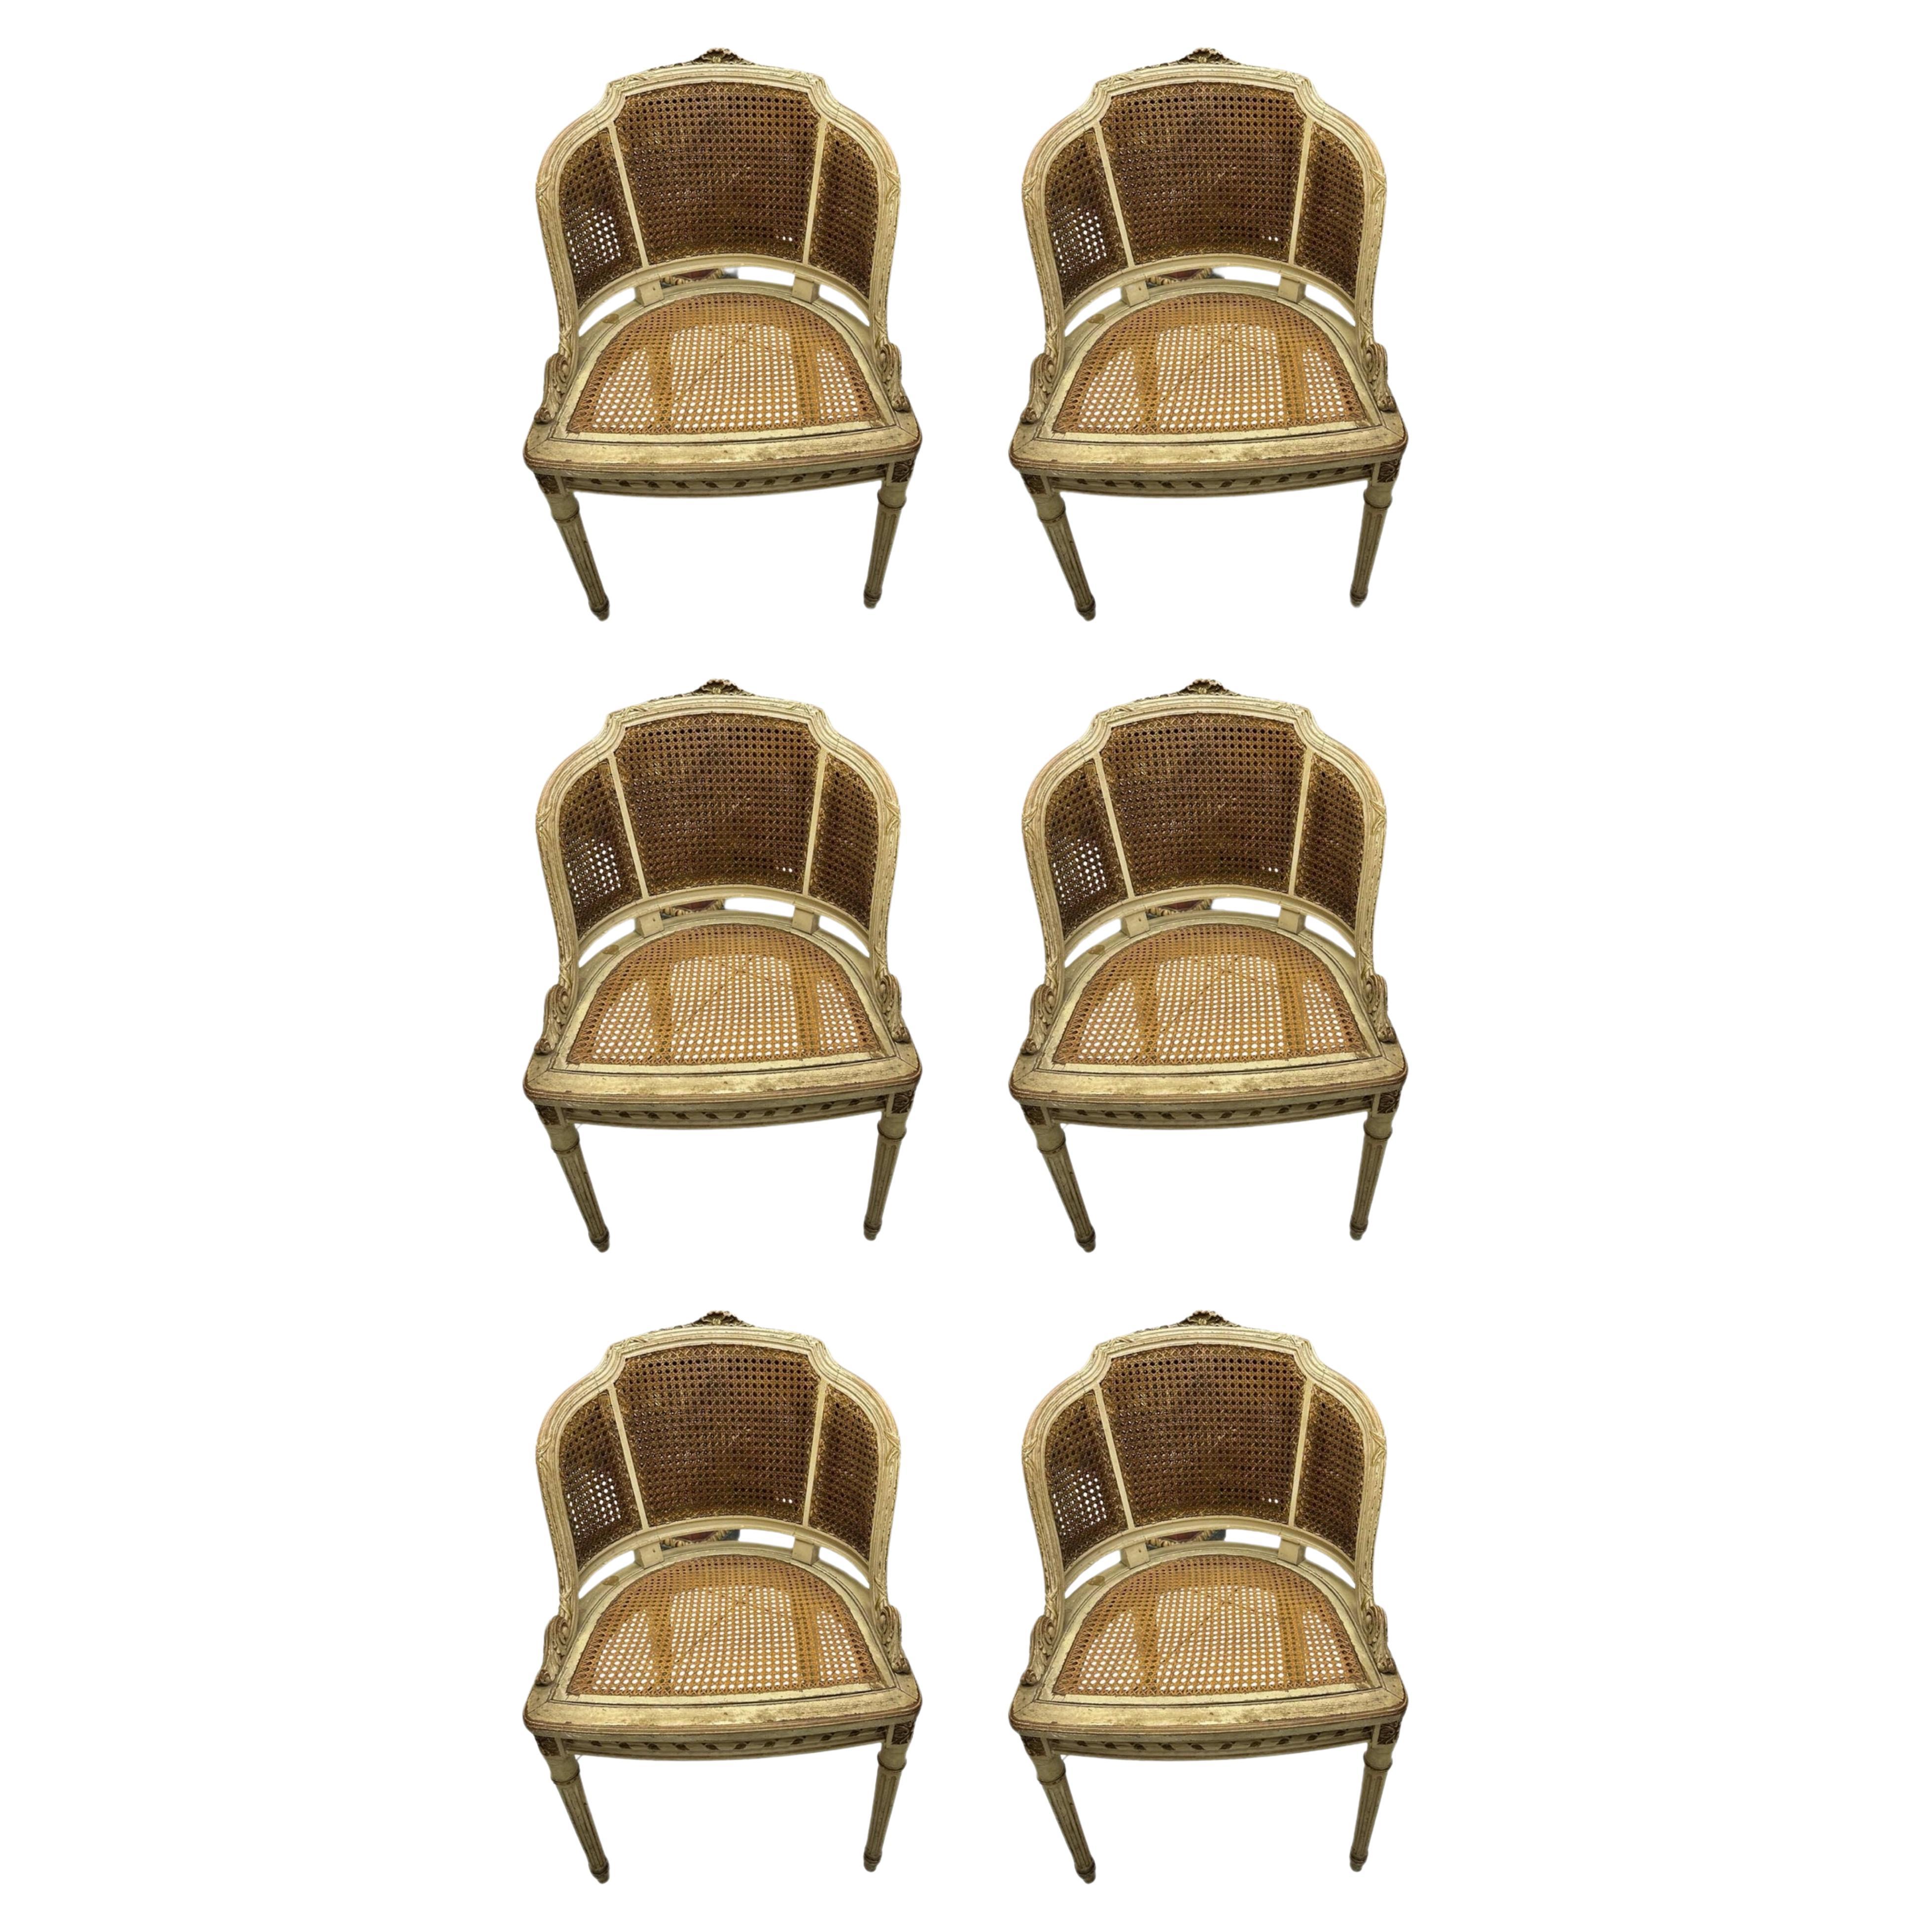 Beautiful and Unique 6 (Six) 19th Century Italian Armchairs